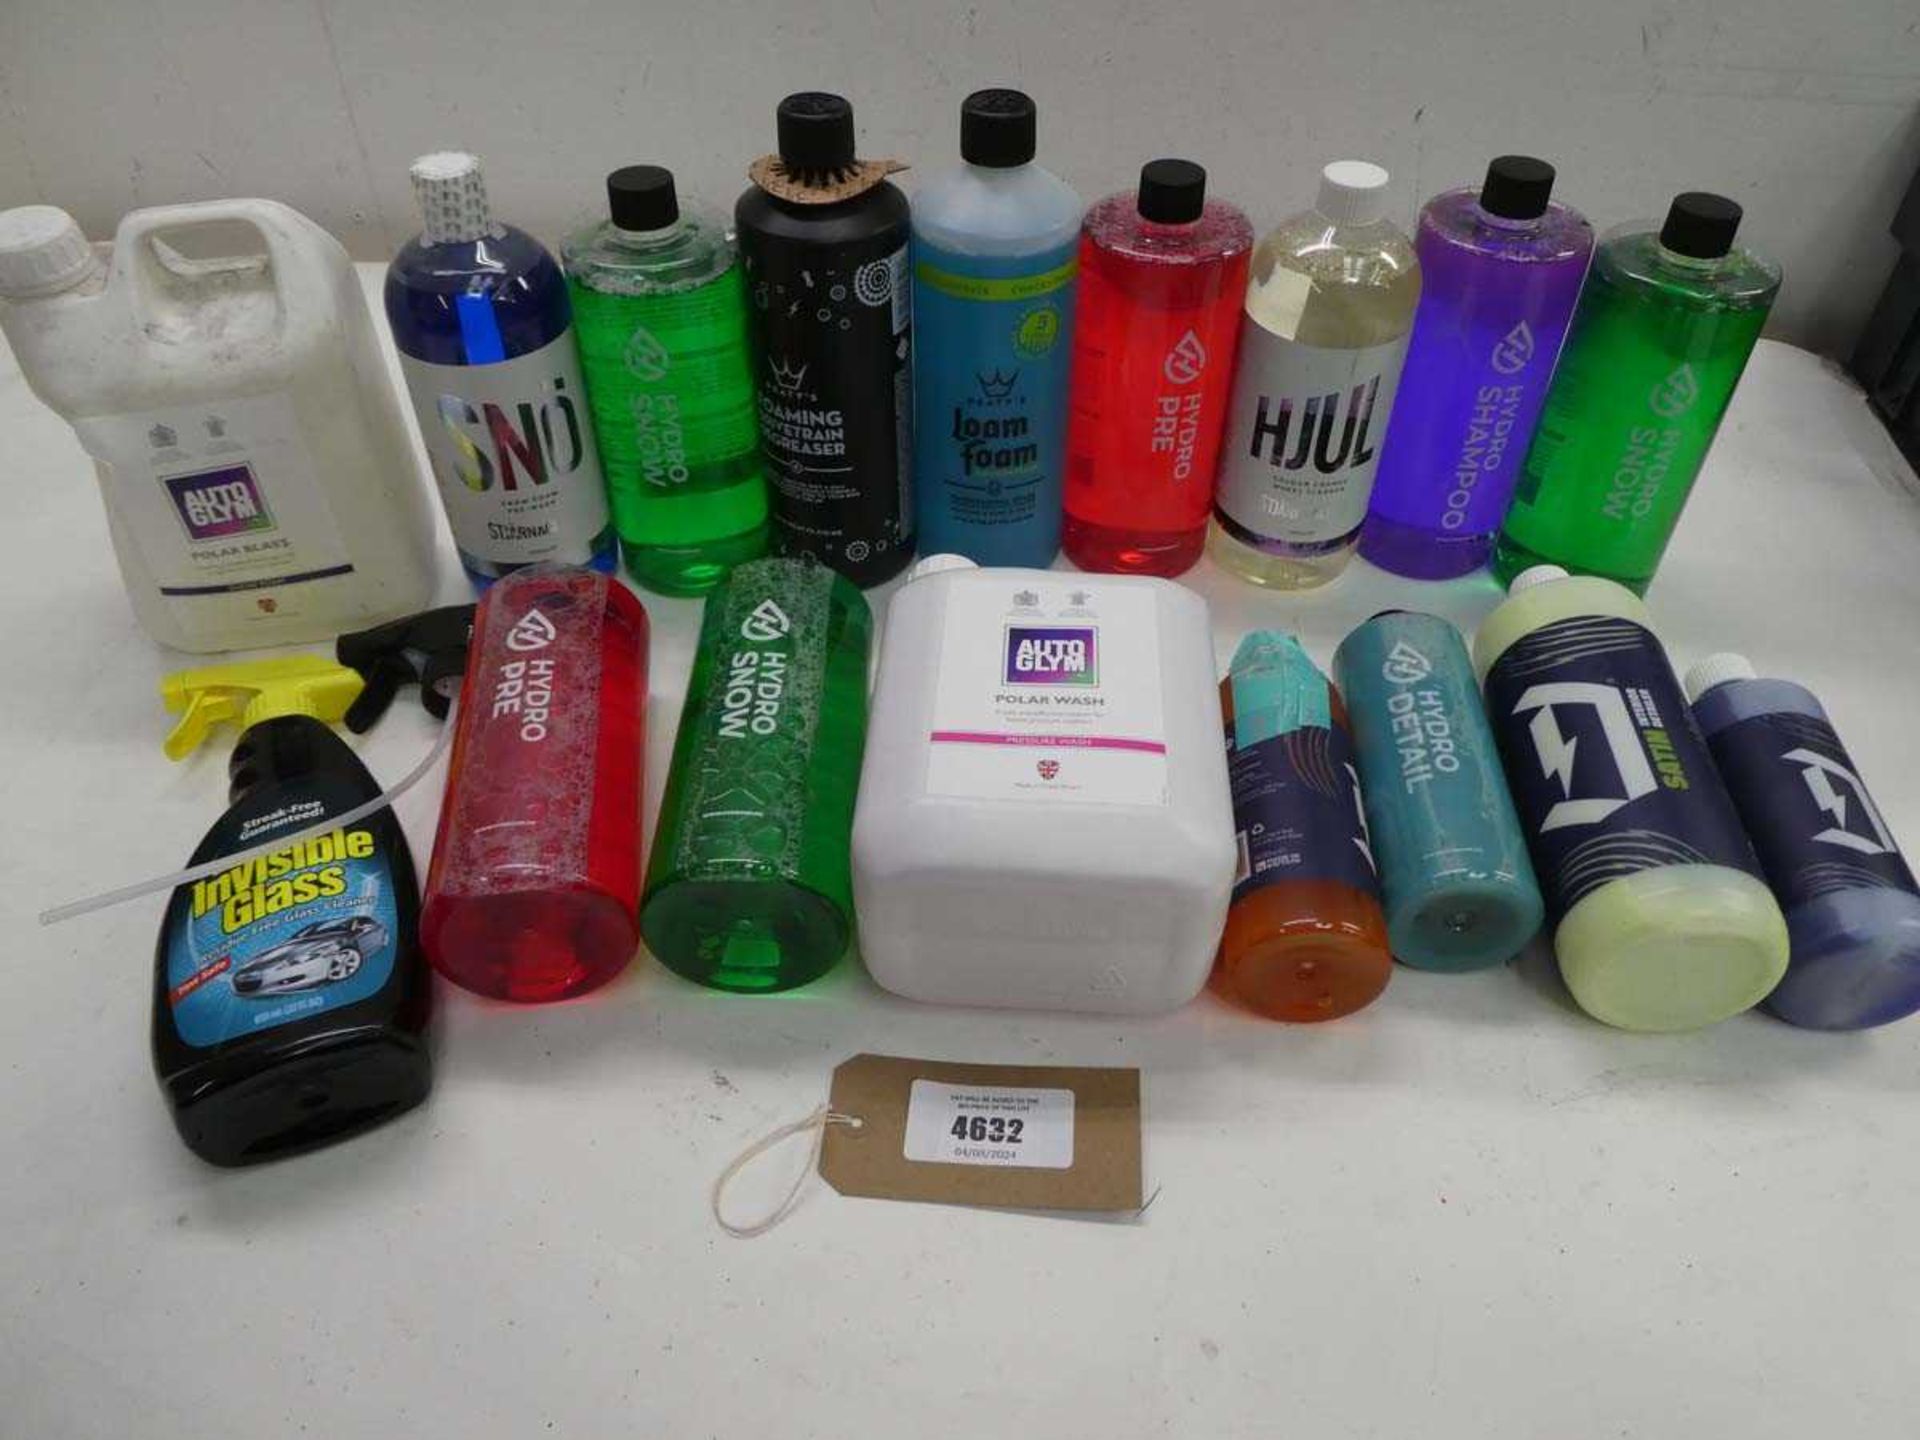 +VAT Car cleaning products including Snow Foam, shampoo, wheel & window cleaner etc